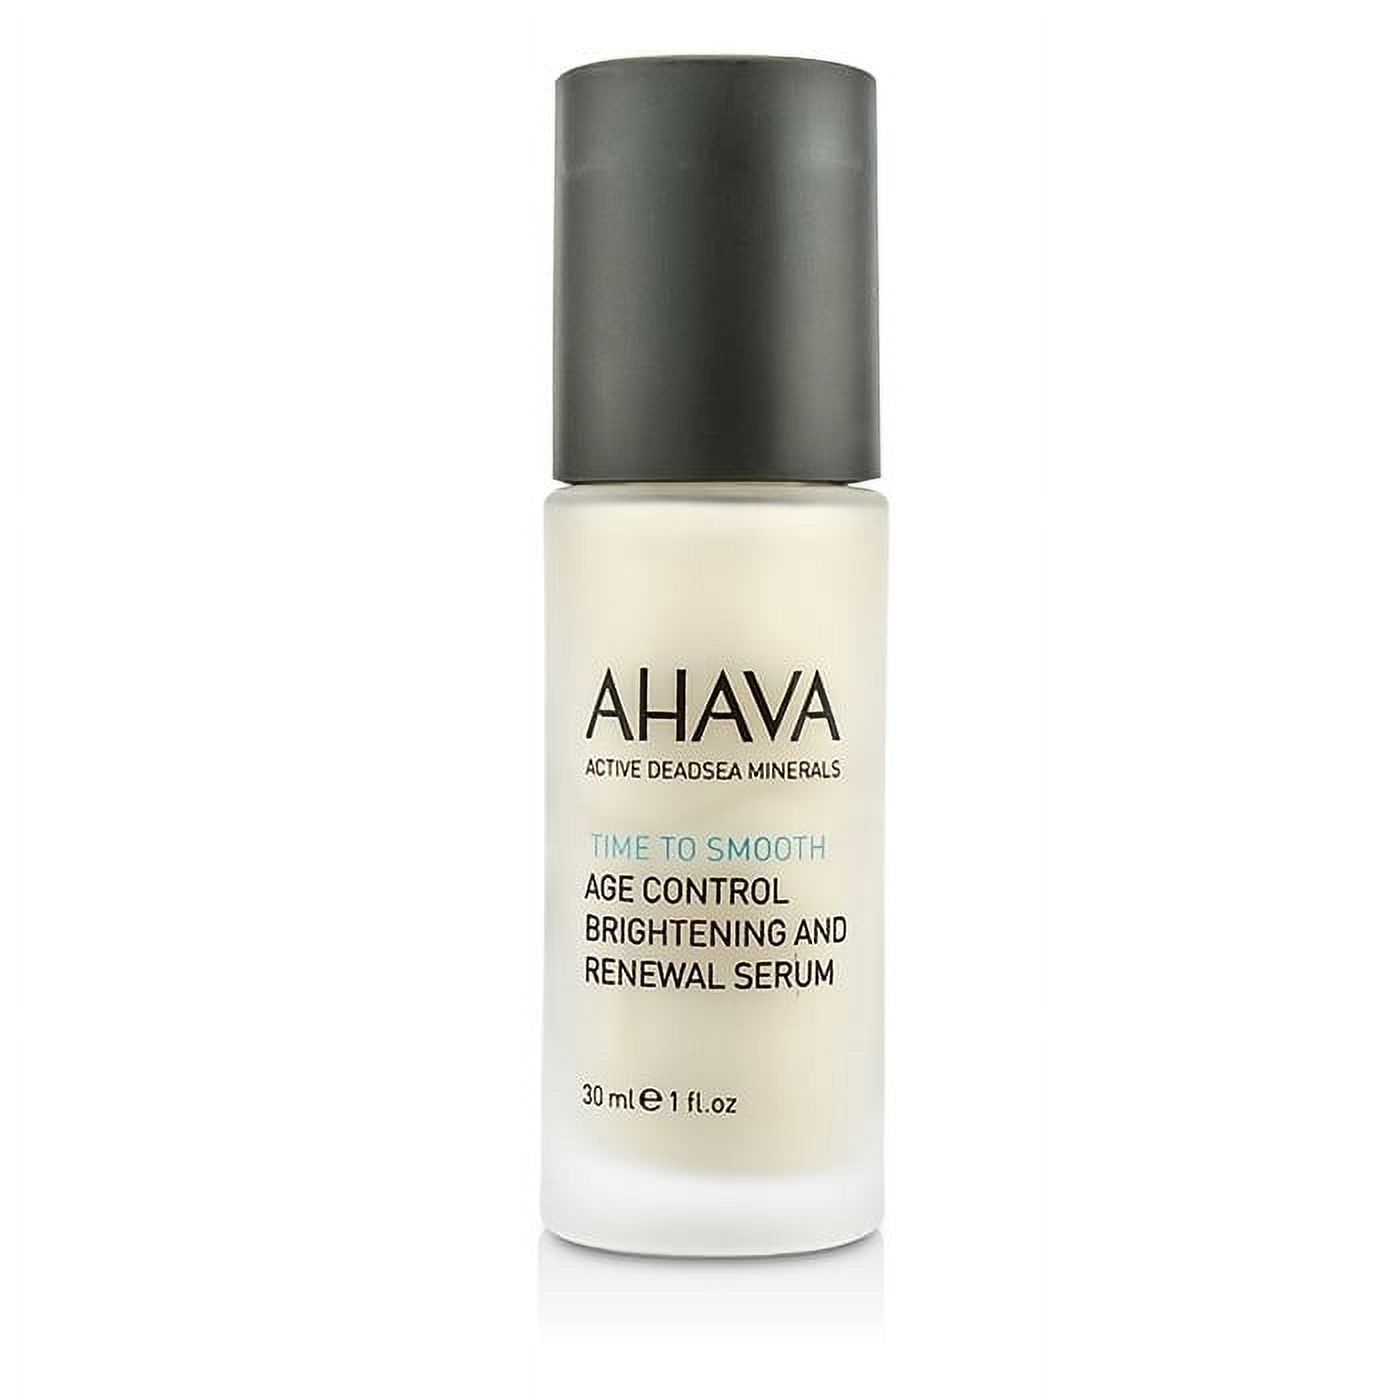 Ahava - Time To Smooth Age Control Brightening and Renewal Serum(30ml/1oz) - image 3 of 4